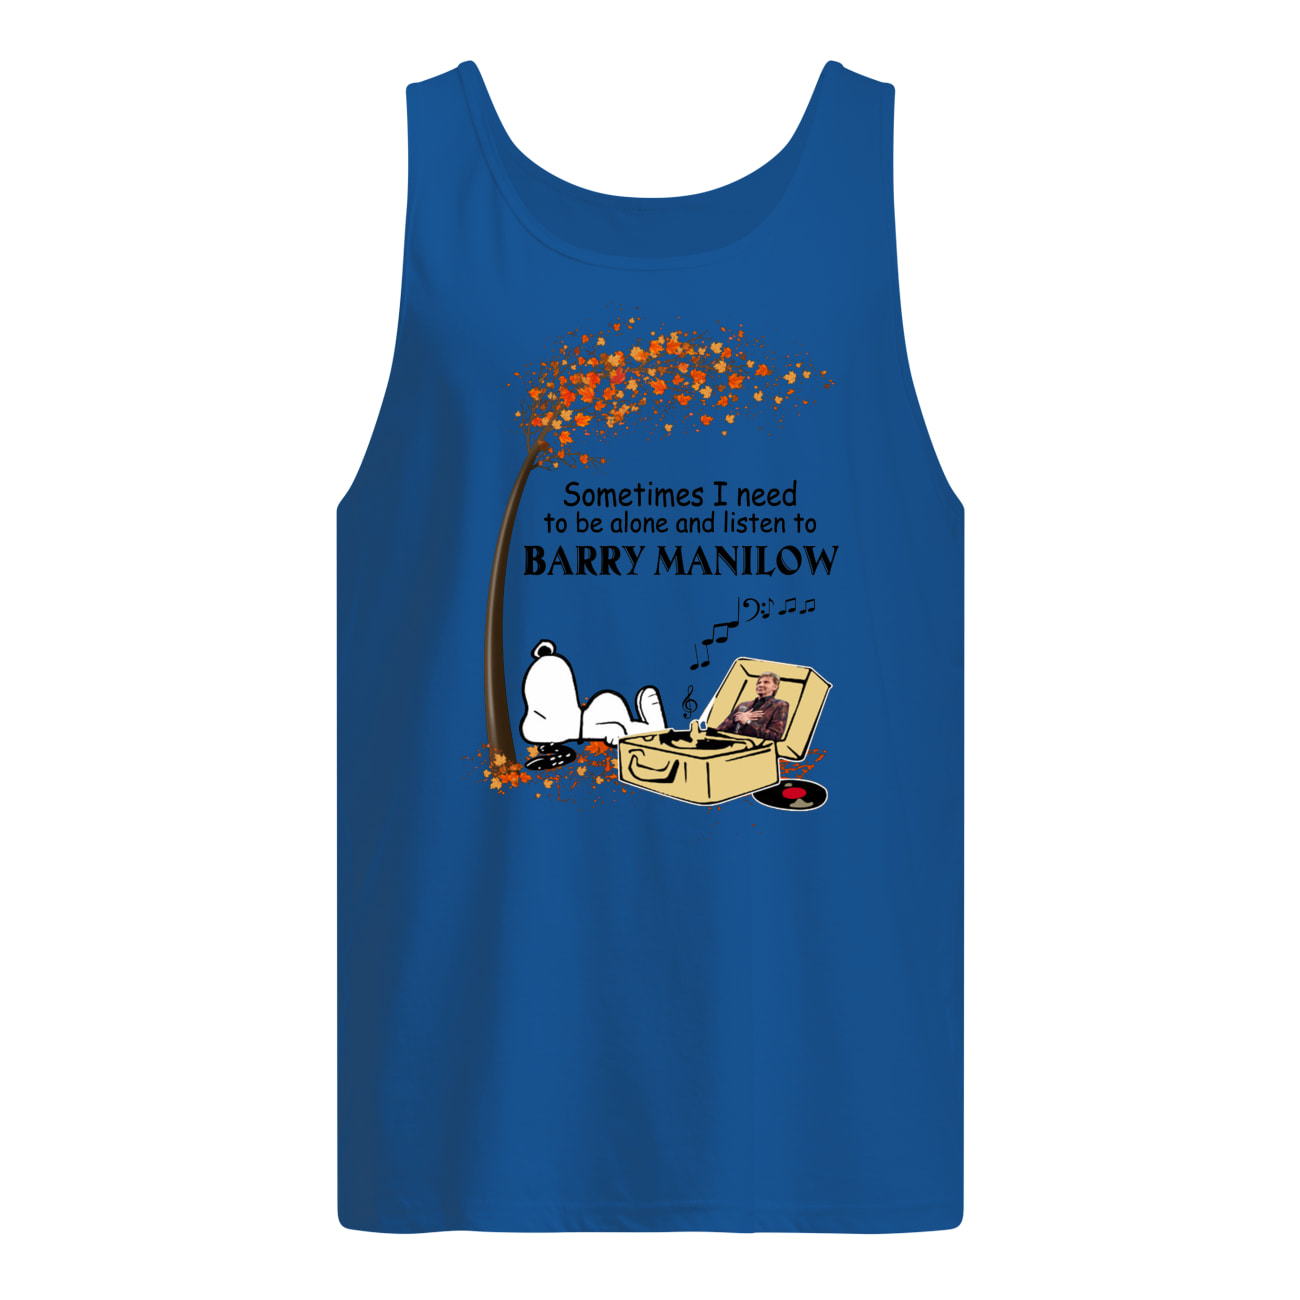 Snoopy sometimes I need to be alone and listen to barry manilow tank top